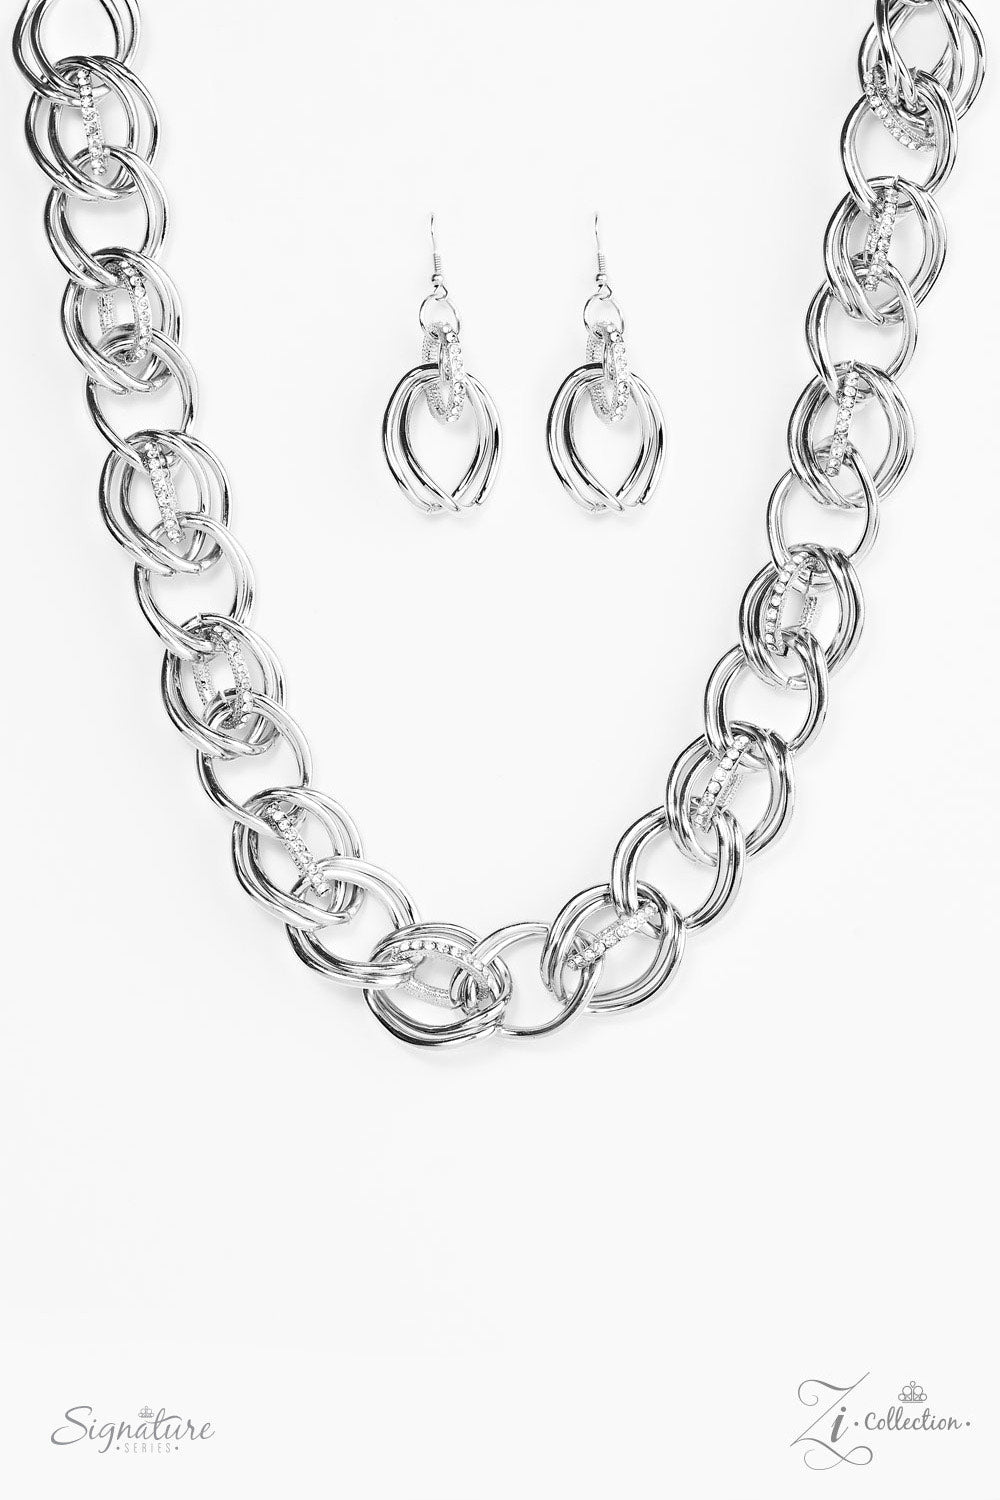 The Michelle  Zi Collection Silver Paparazzi Necklace Cashmere Pink Jewels - Cashmere Pink Jewels & Accessories, Cashmere Pink Jewels & Accessories - Paparazzi